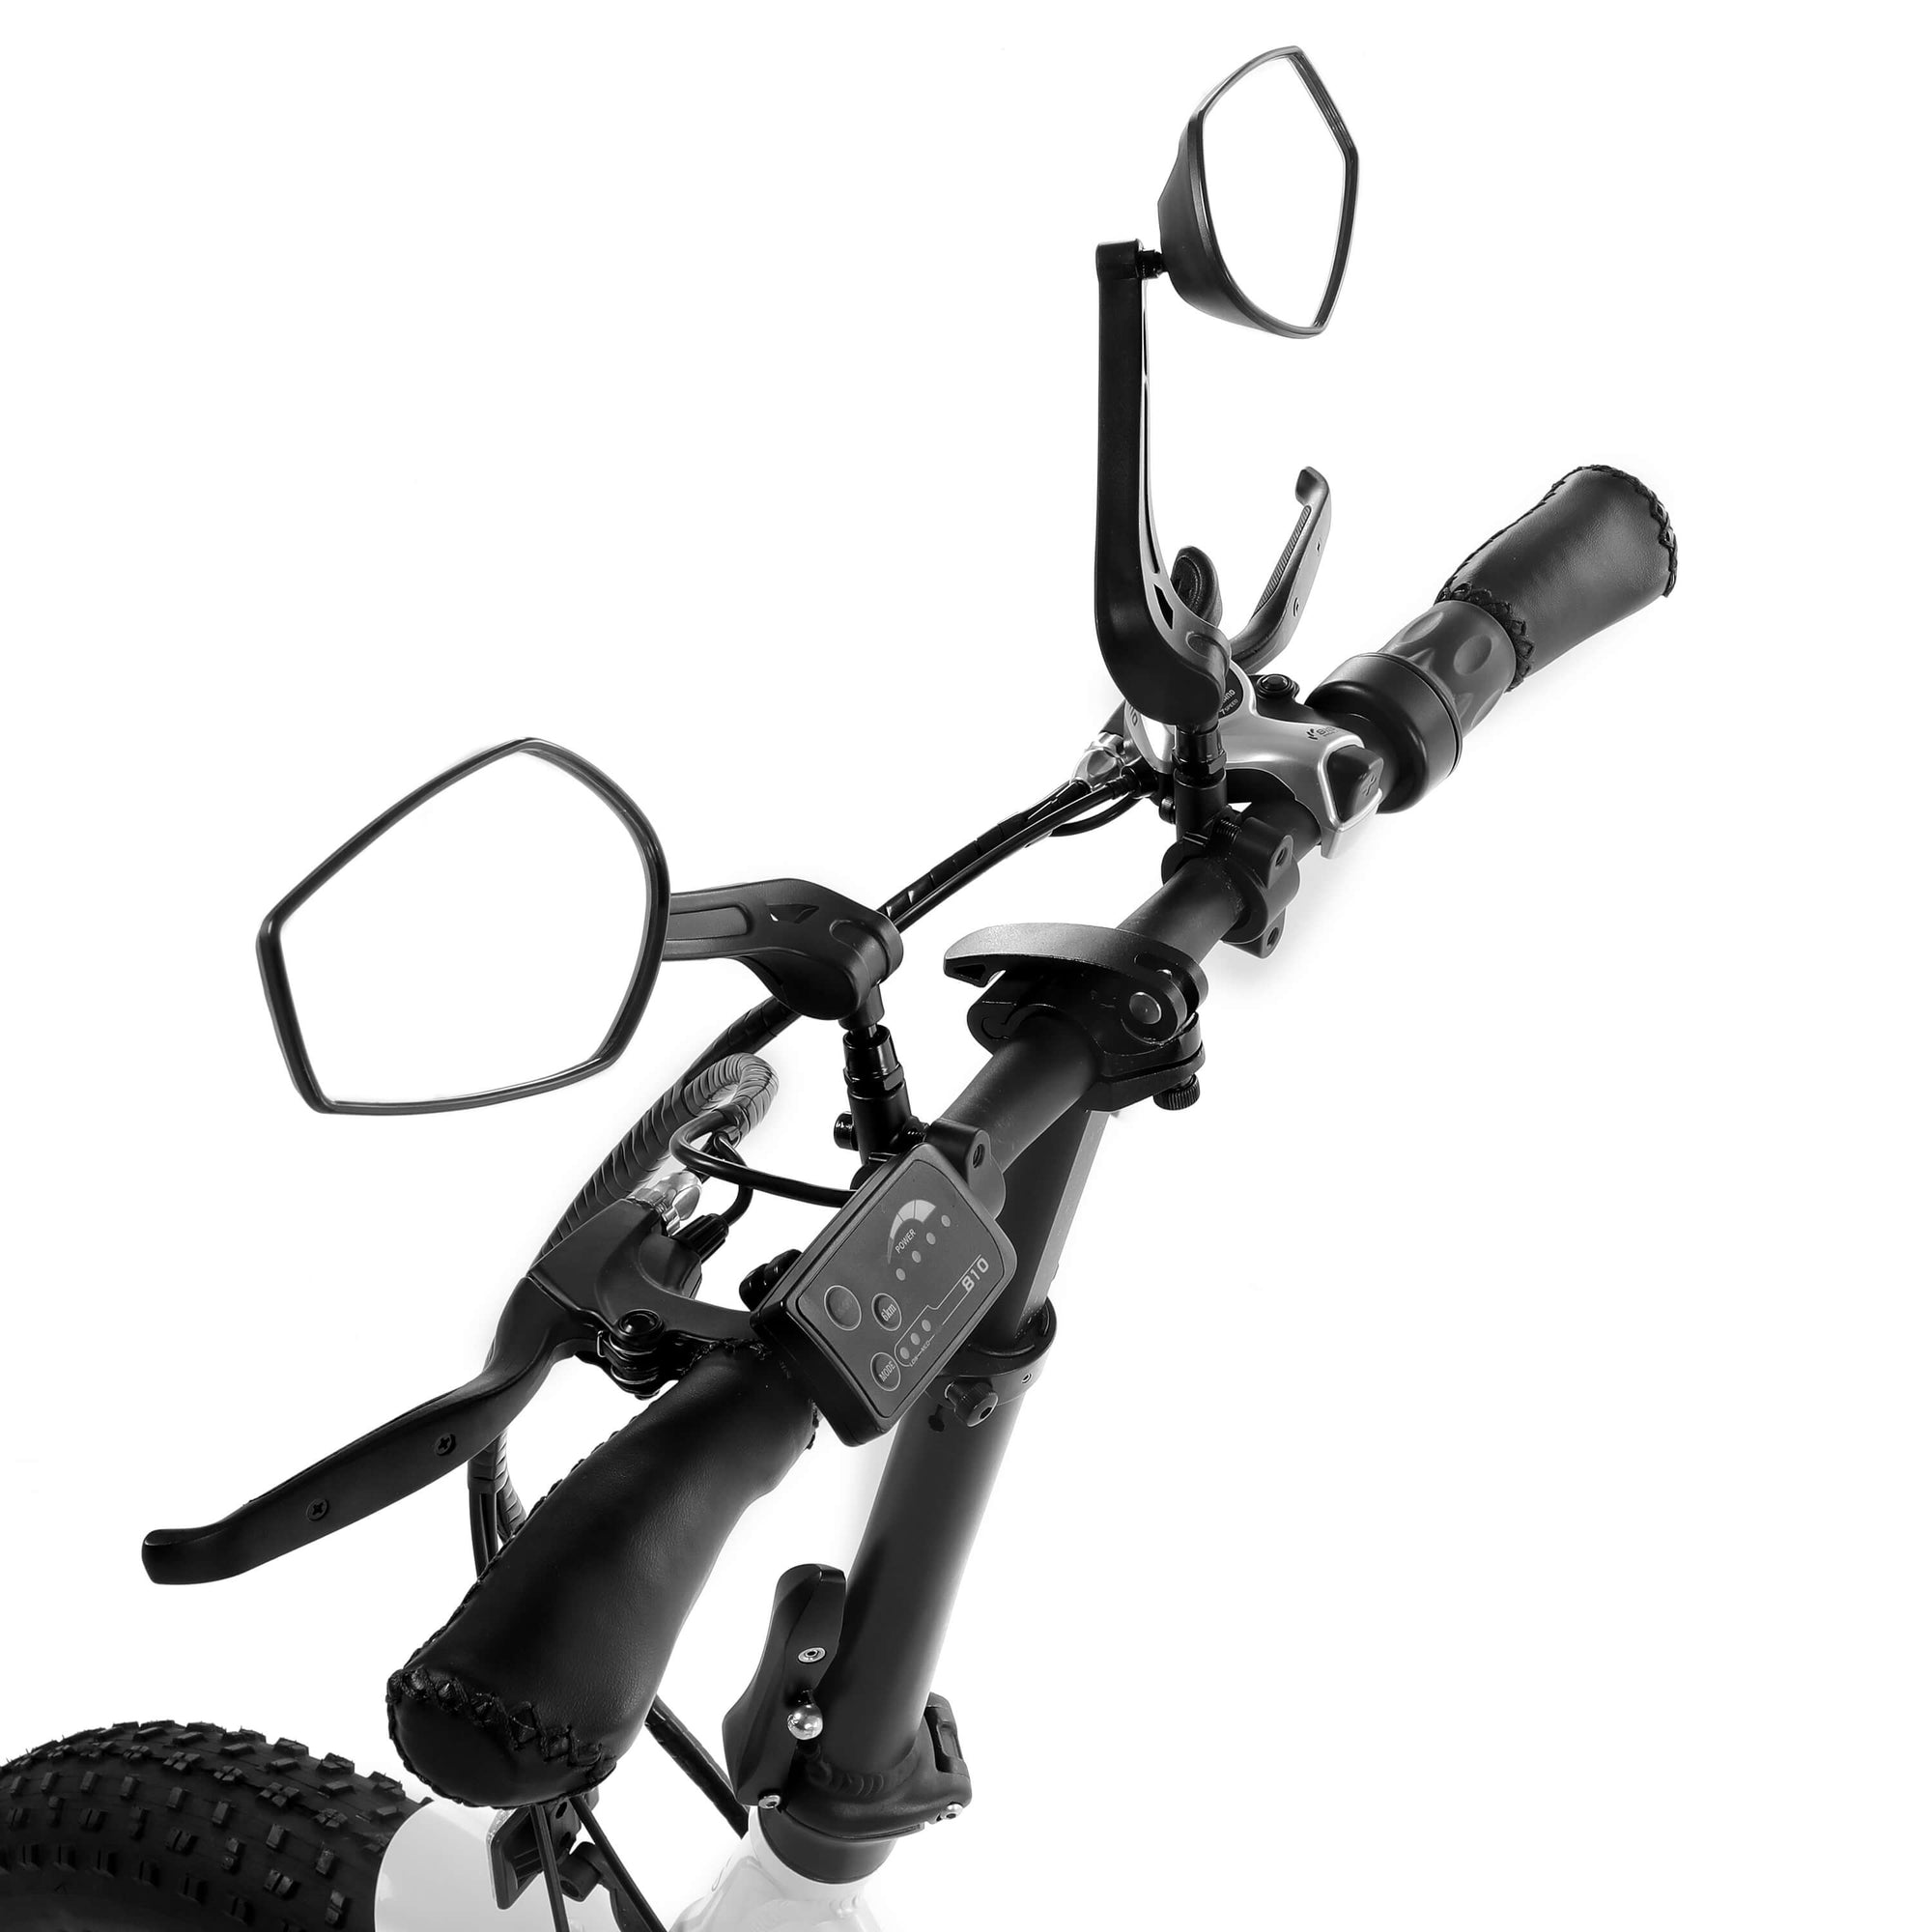 Ecotric Rearview Mirror for 20" Fat Tire Electric Bike, Dolphin & Starfish